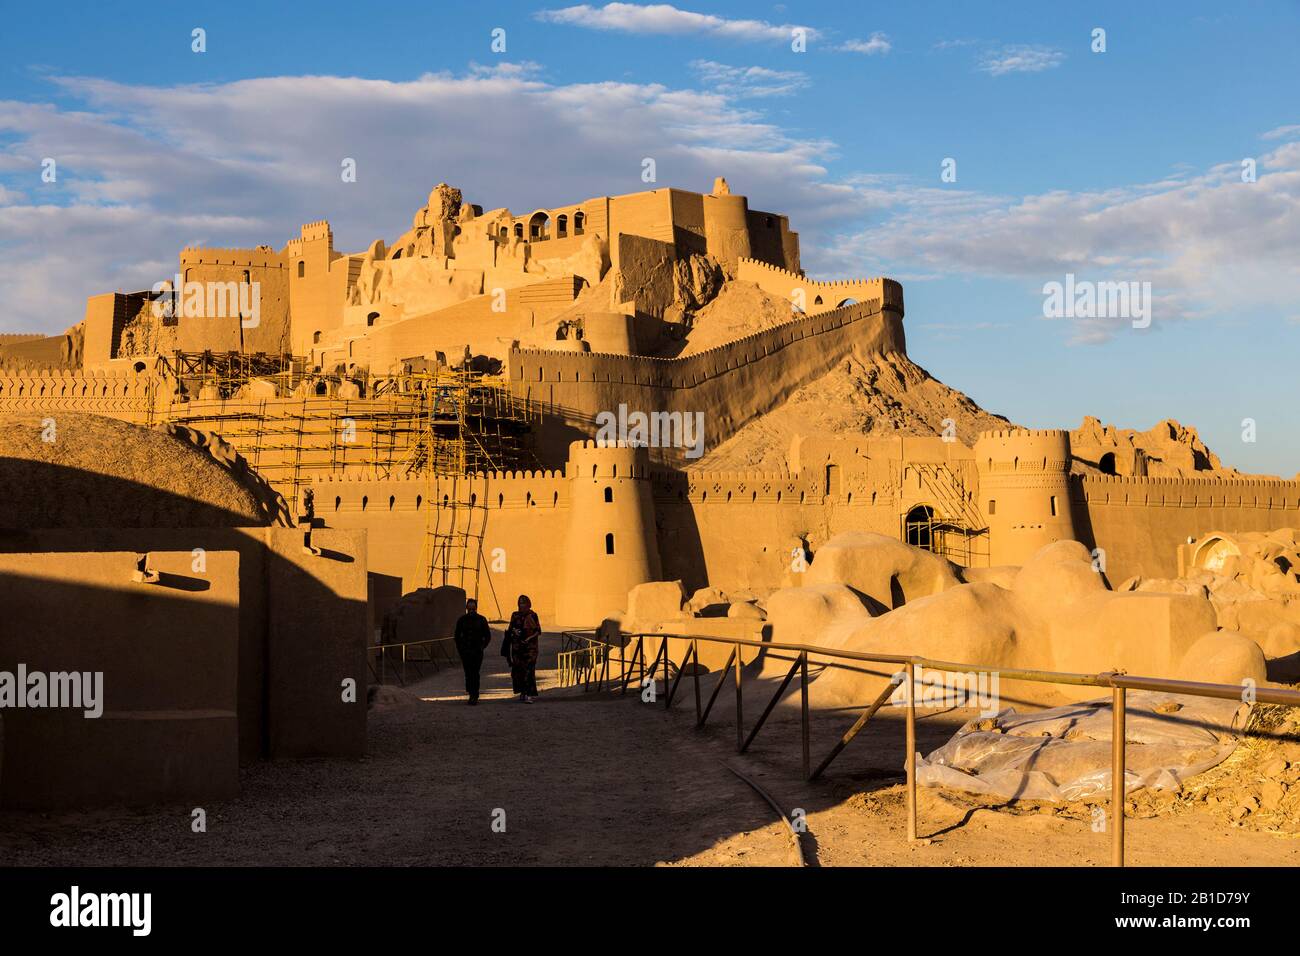 People visit restored Arg-e Bam citadel, the largest adobe building in the world, located in Bam Stock Photo